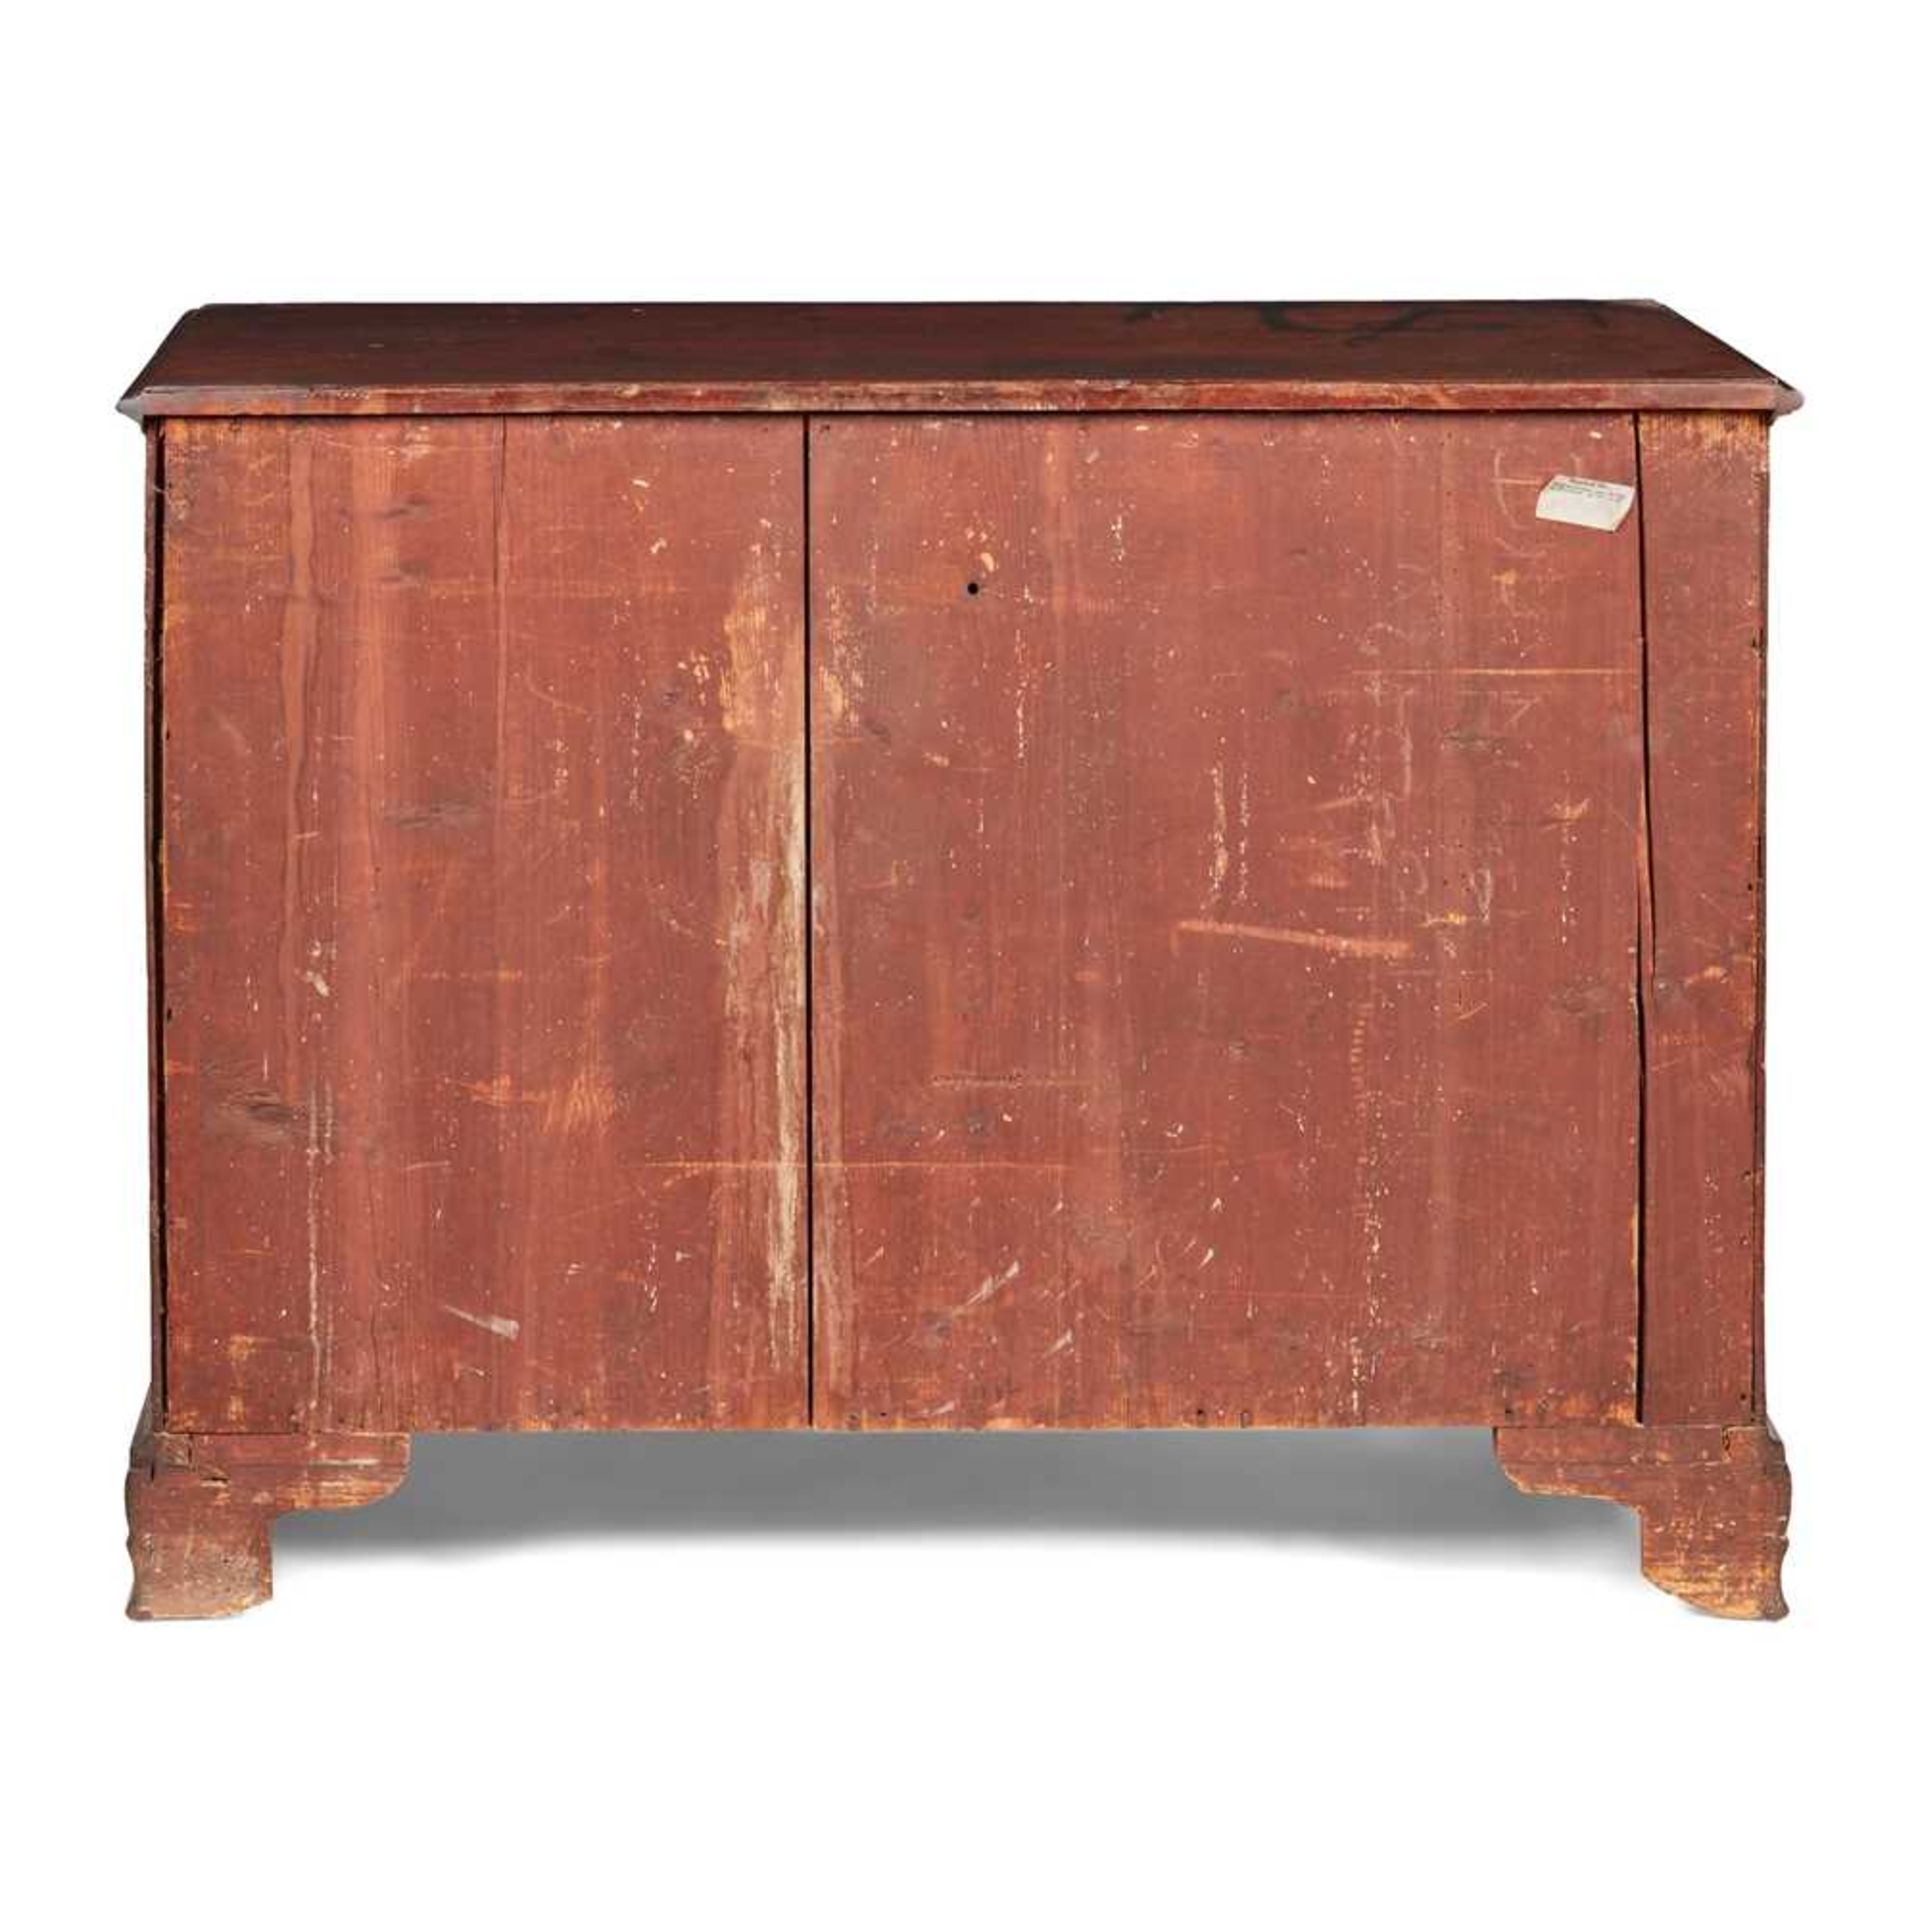 GEORGE III MAHOGANY CHEST EARLY 19TH CENTURY - Image 2 of 2